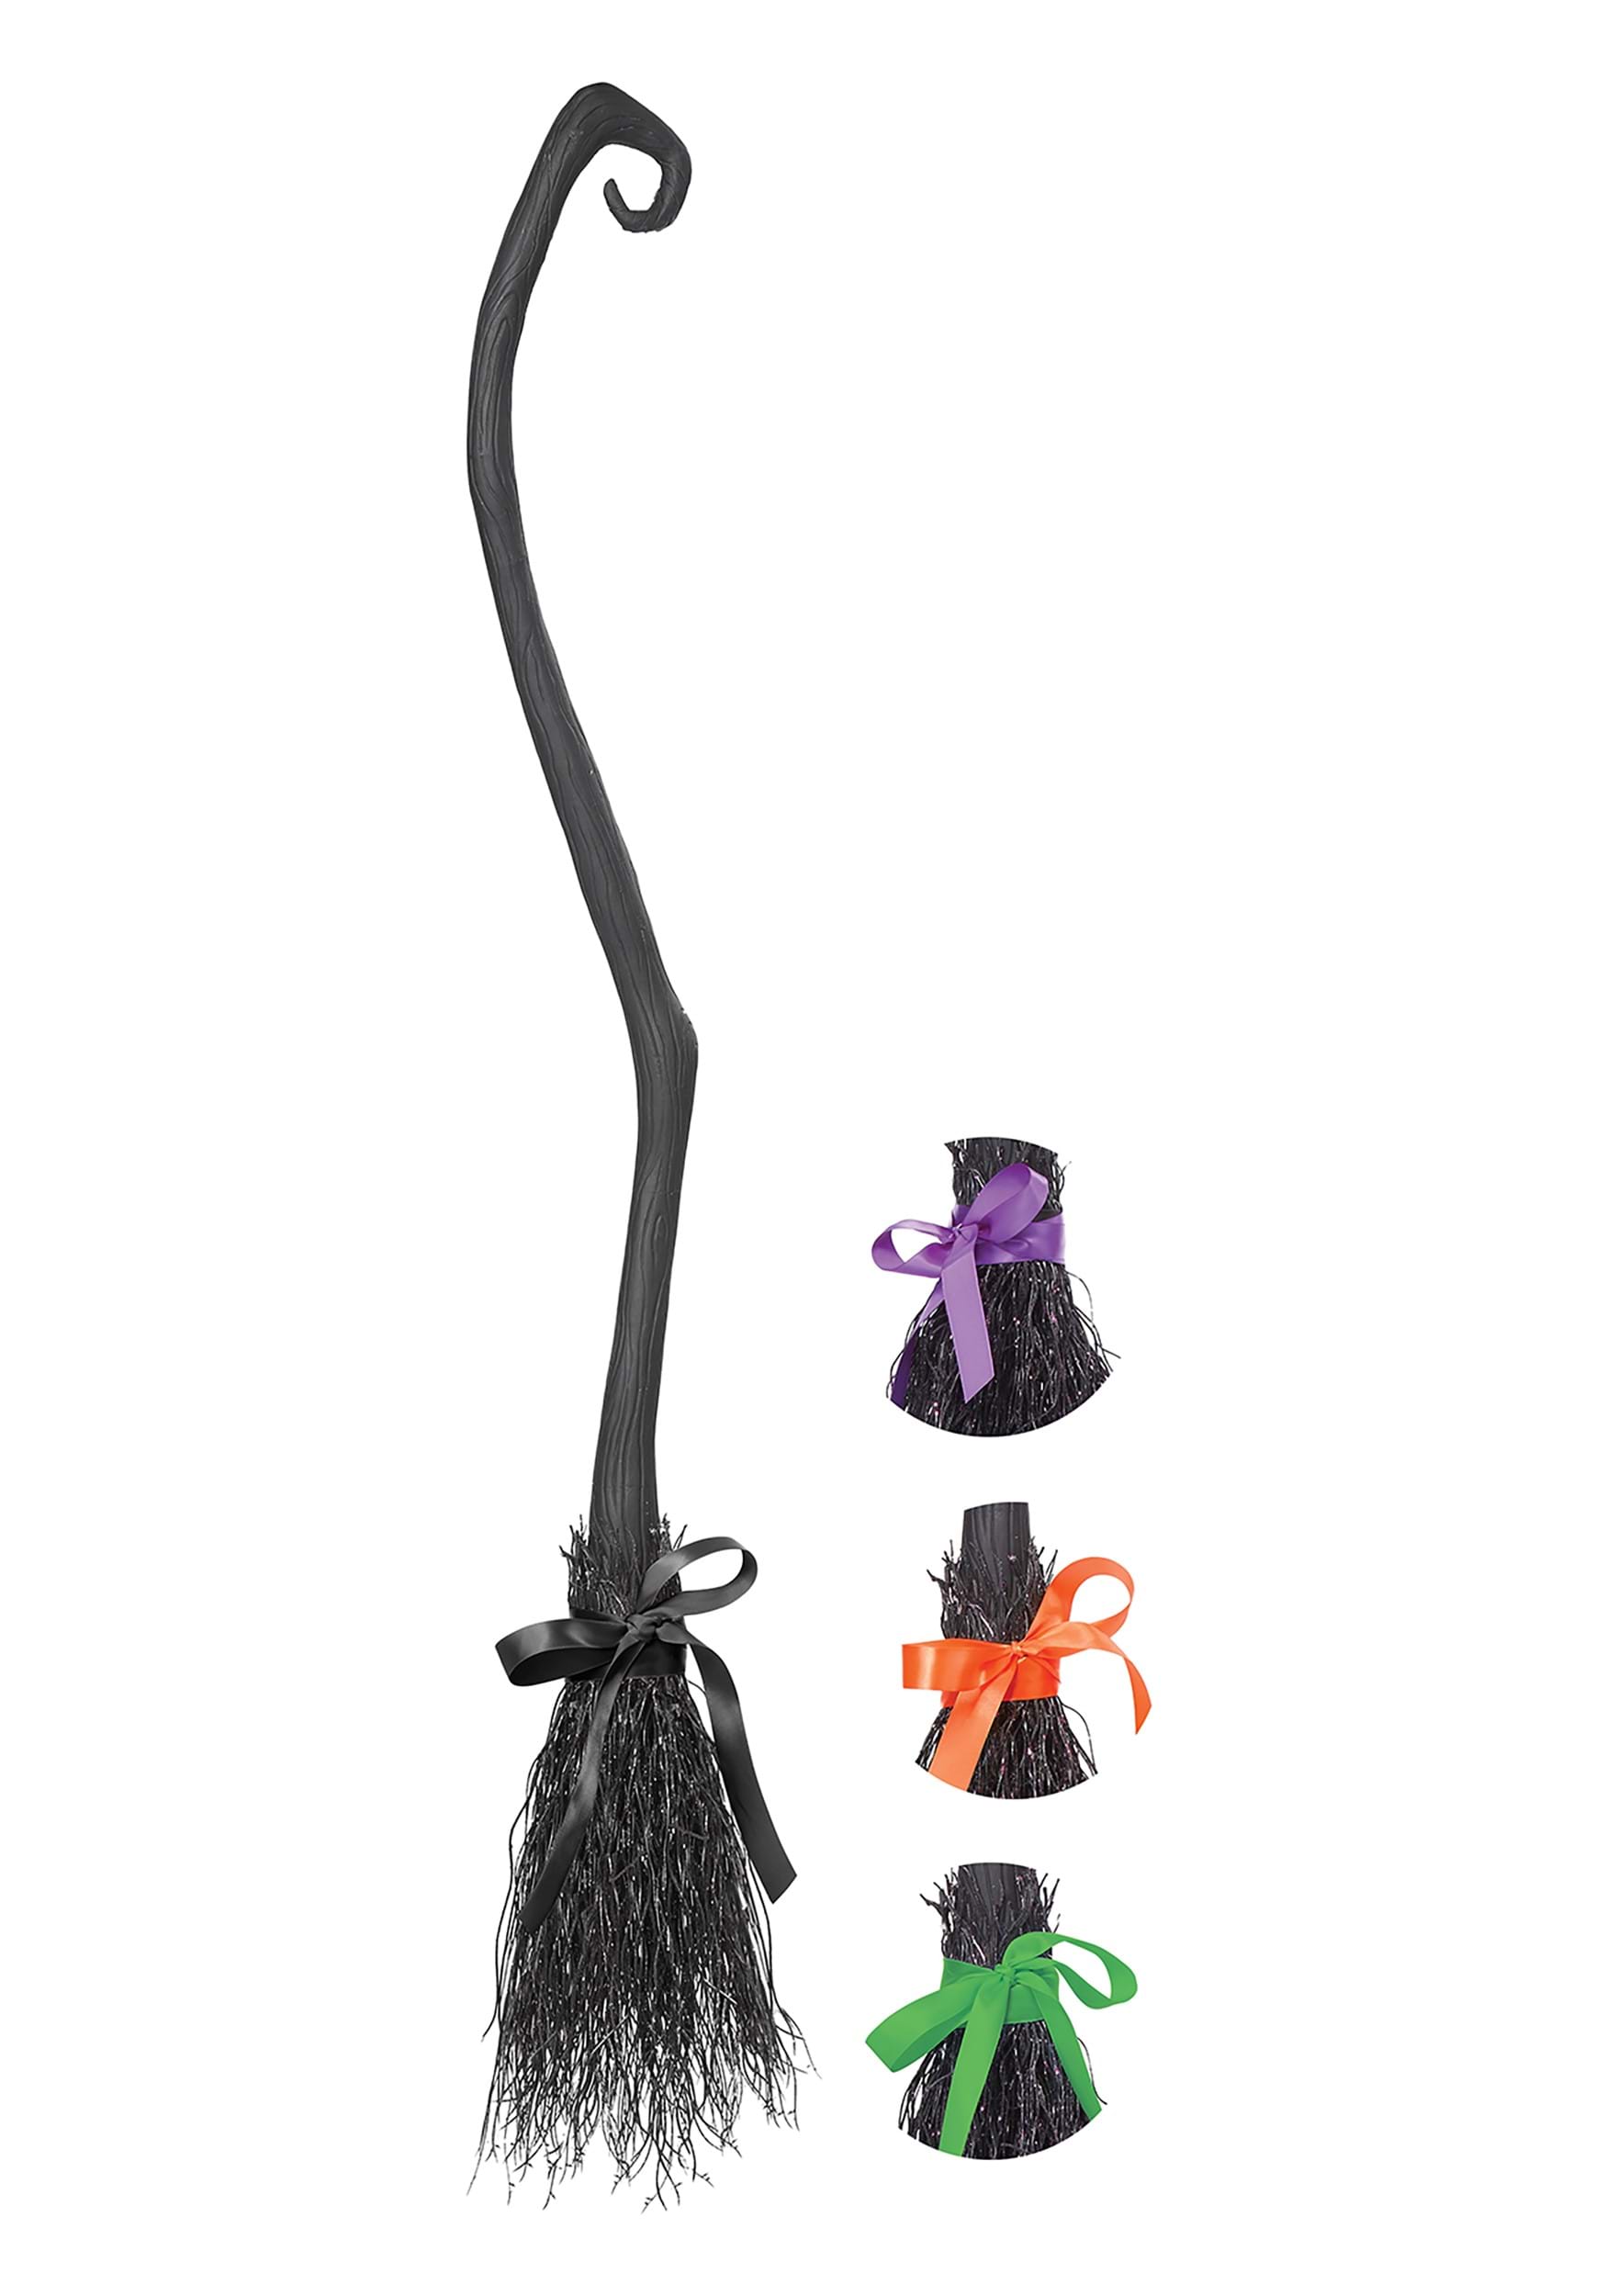 https://images.halloweencostumes.com/products/22127/1-1/witchs-broom.jpg